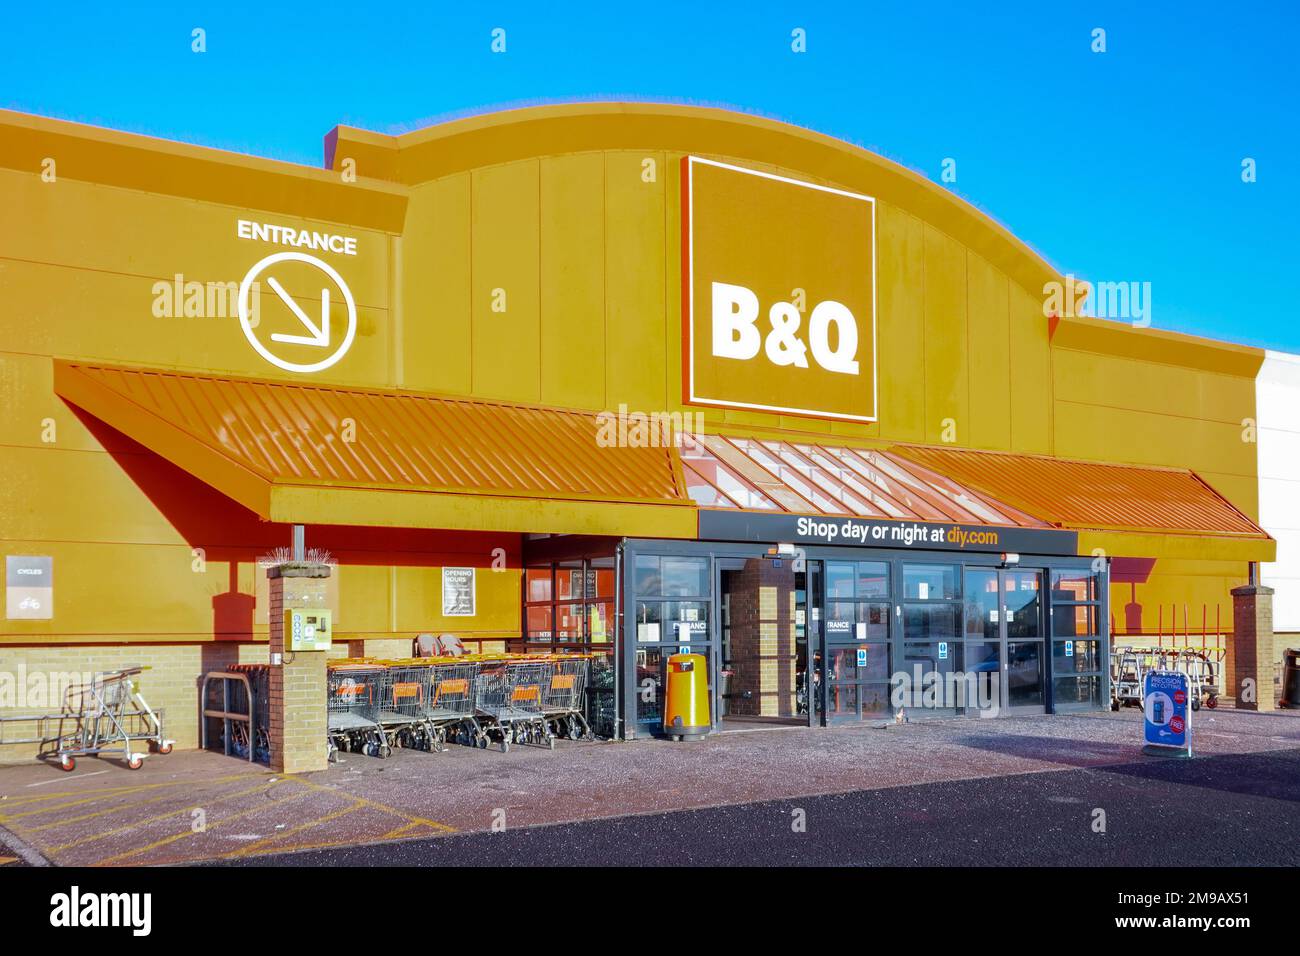 Entrance to the DIY store 'B & Q', with customers, Stevenston, Scotland, UK Stock Photo